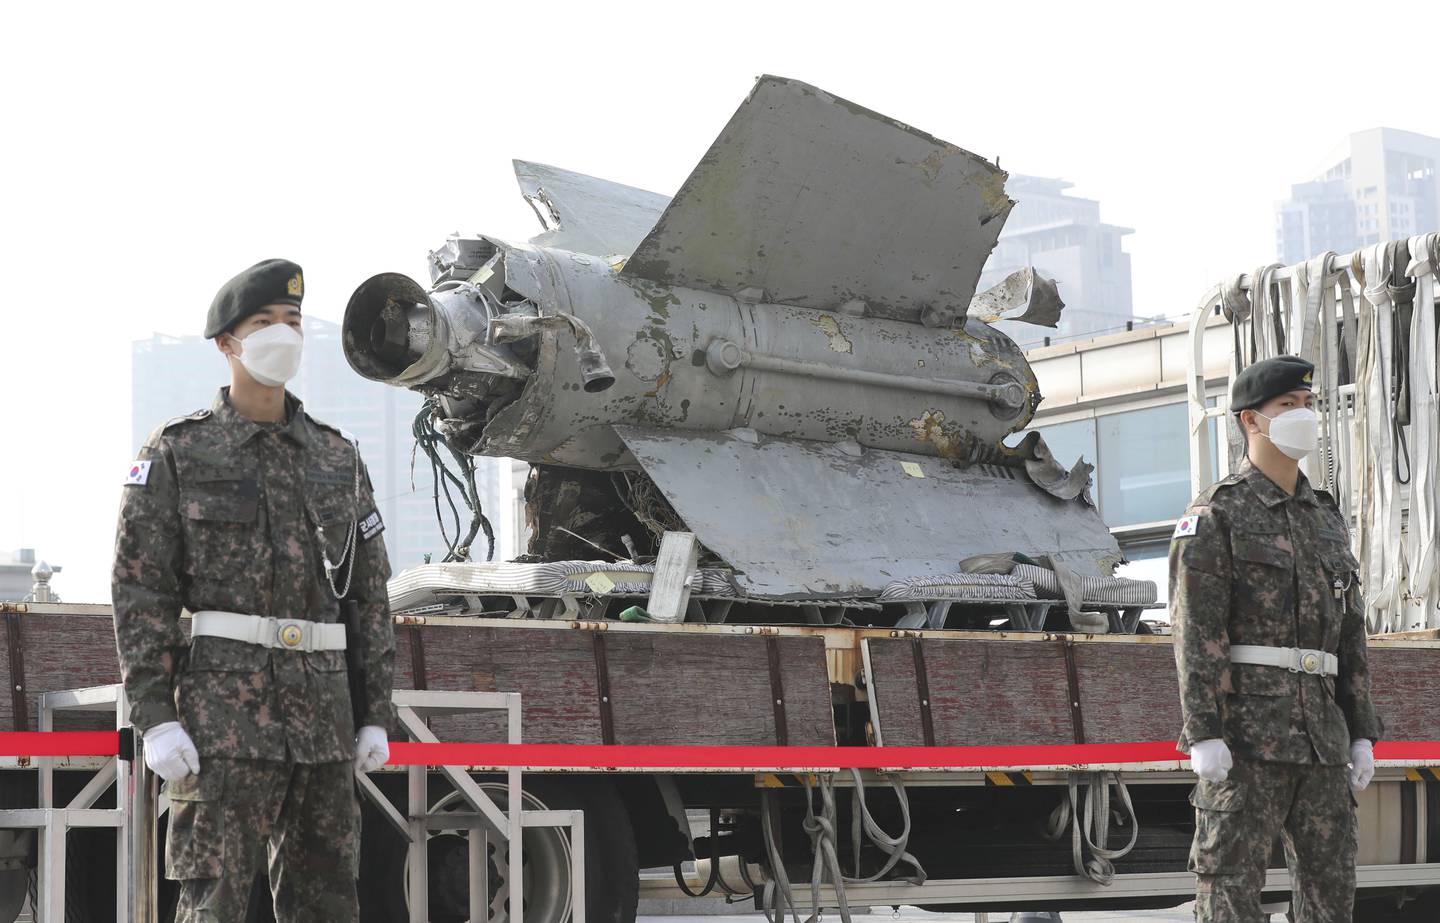 South Korean army soldiers stand in front of the debris of a missile which the Defense Ministry identified as a North Korea's SA-5 surface-to-air missile according to South Korea's military, at the Defense Ministry in Seoul, South Korea, Wednesday, Nov. 9, 2022.